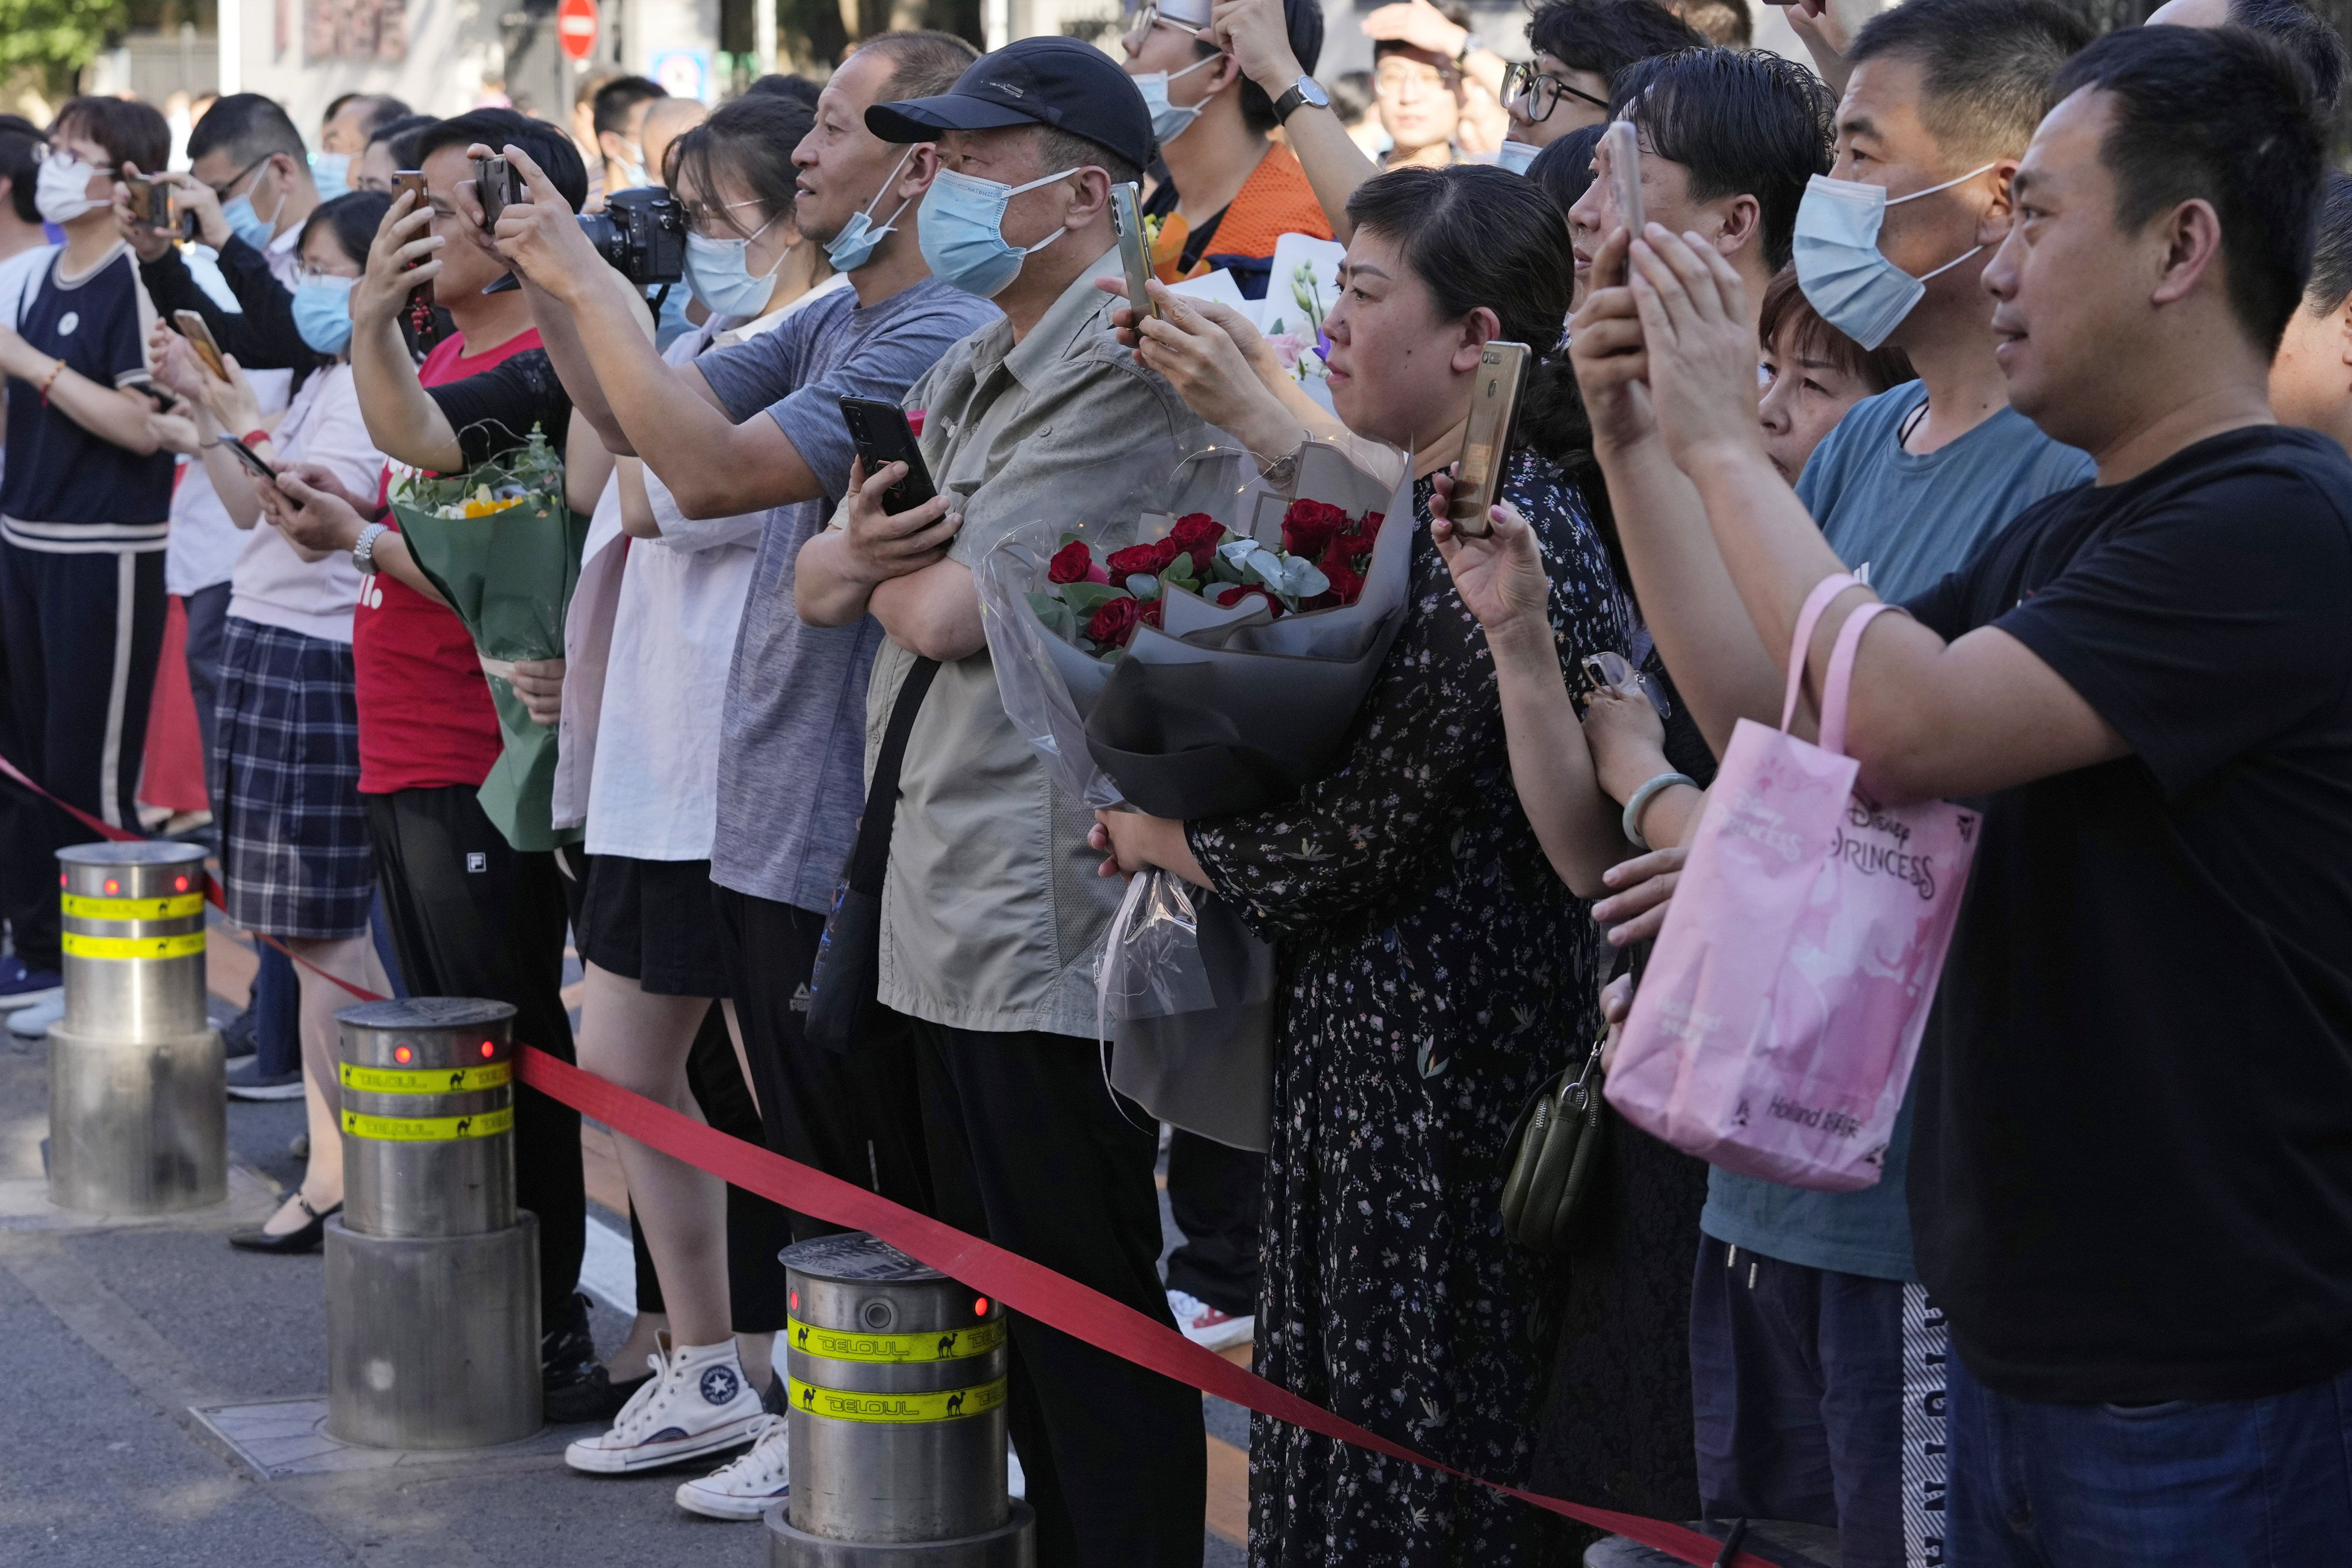 Family members wait for students to finish the final day of China’s national college entrance examinations, known as the gaokao, in Beijing on June 10. Photo: AP